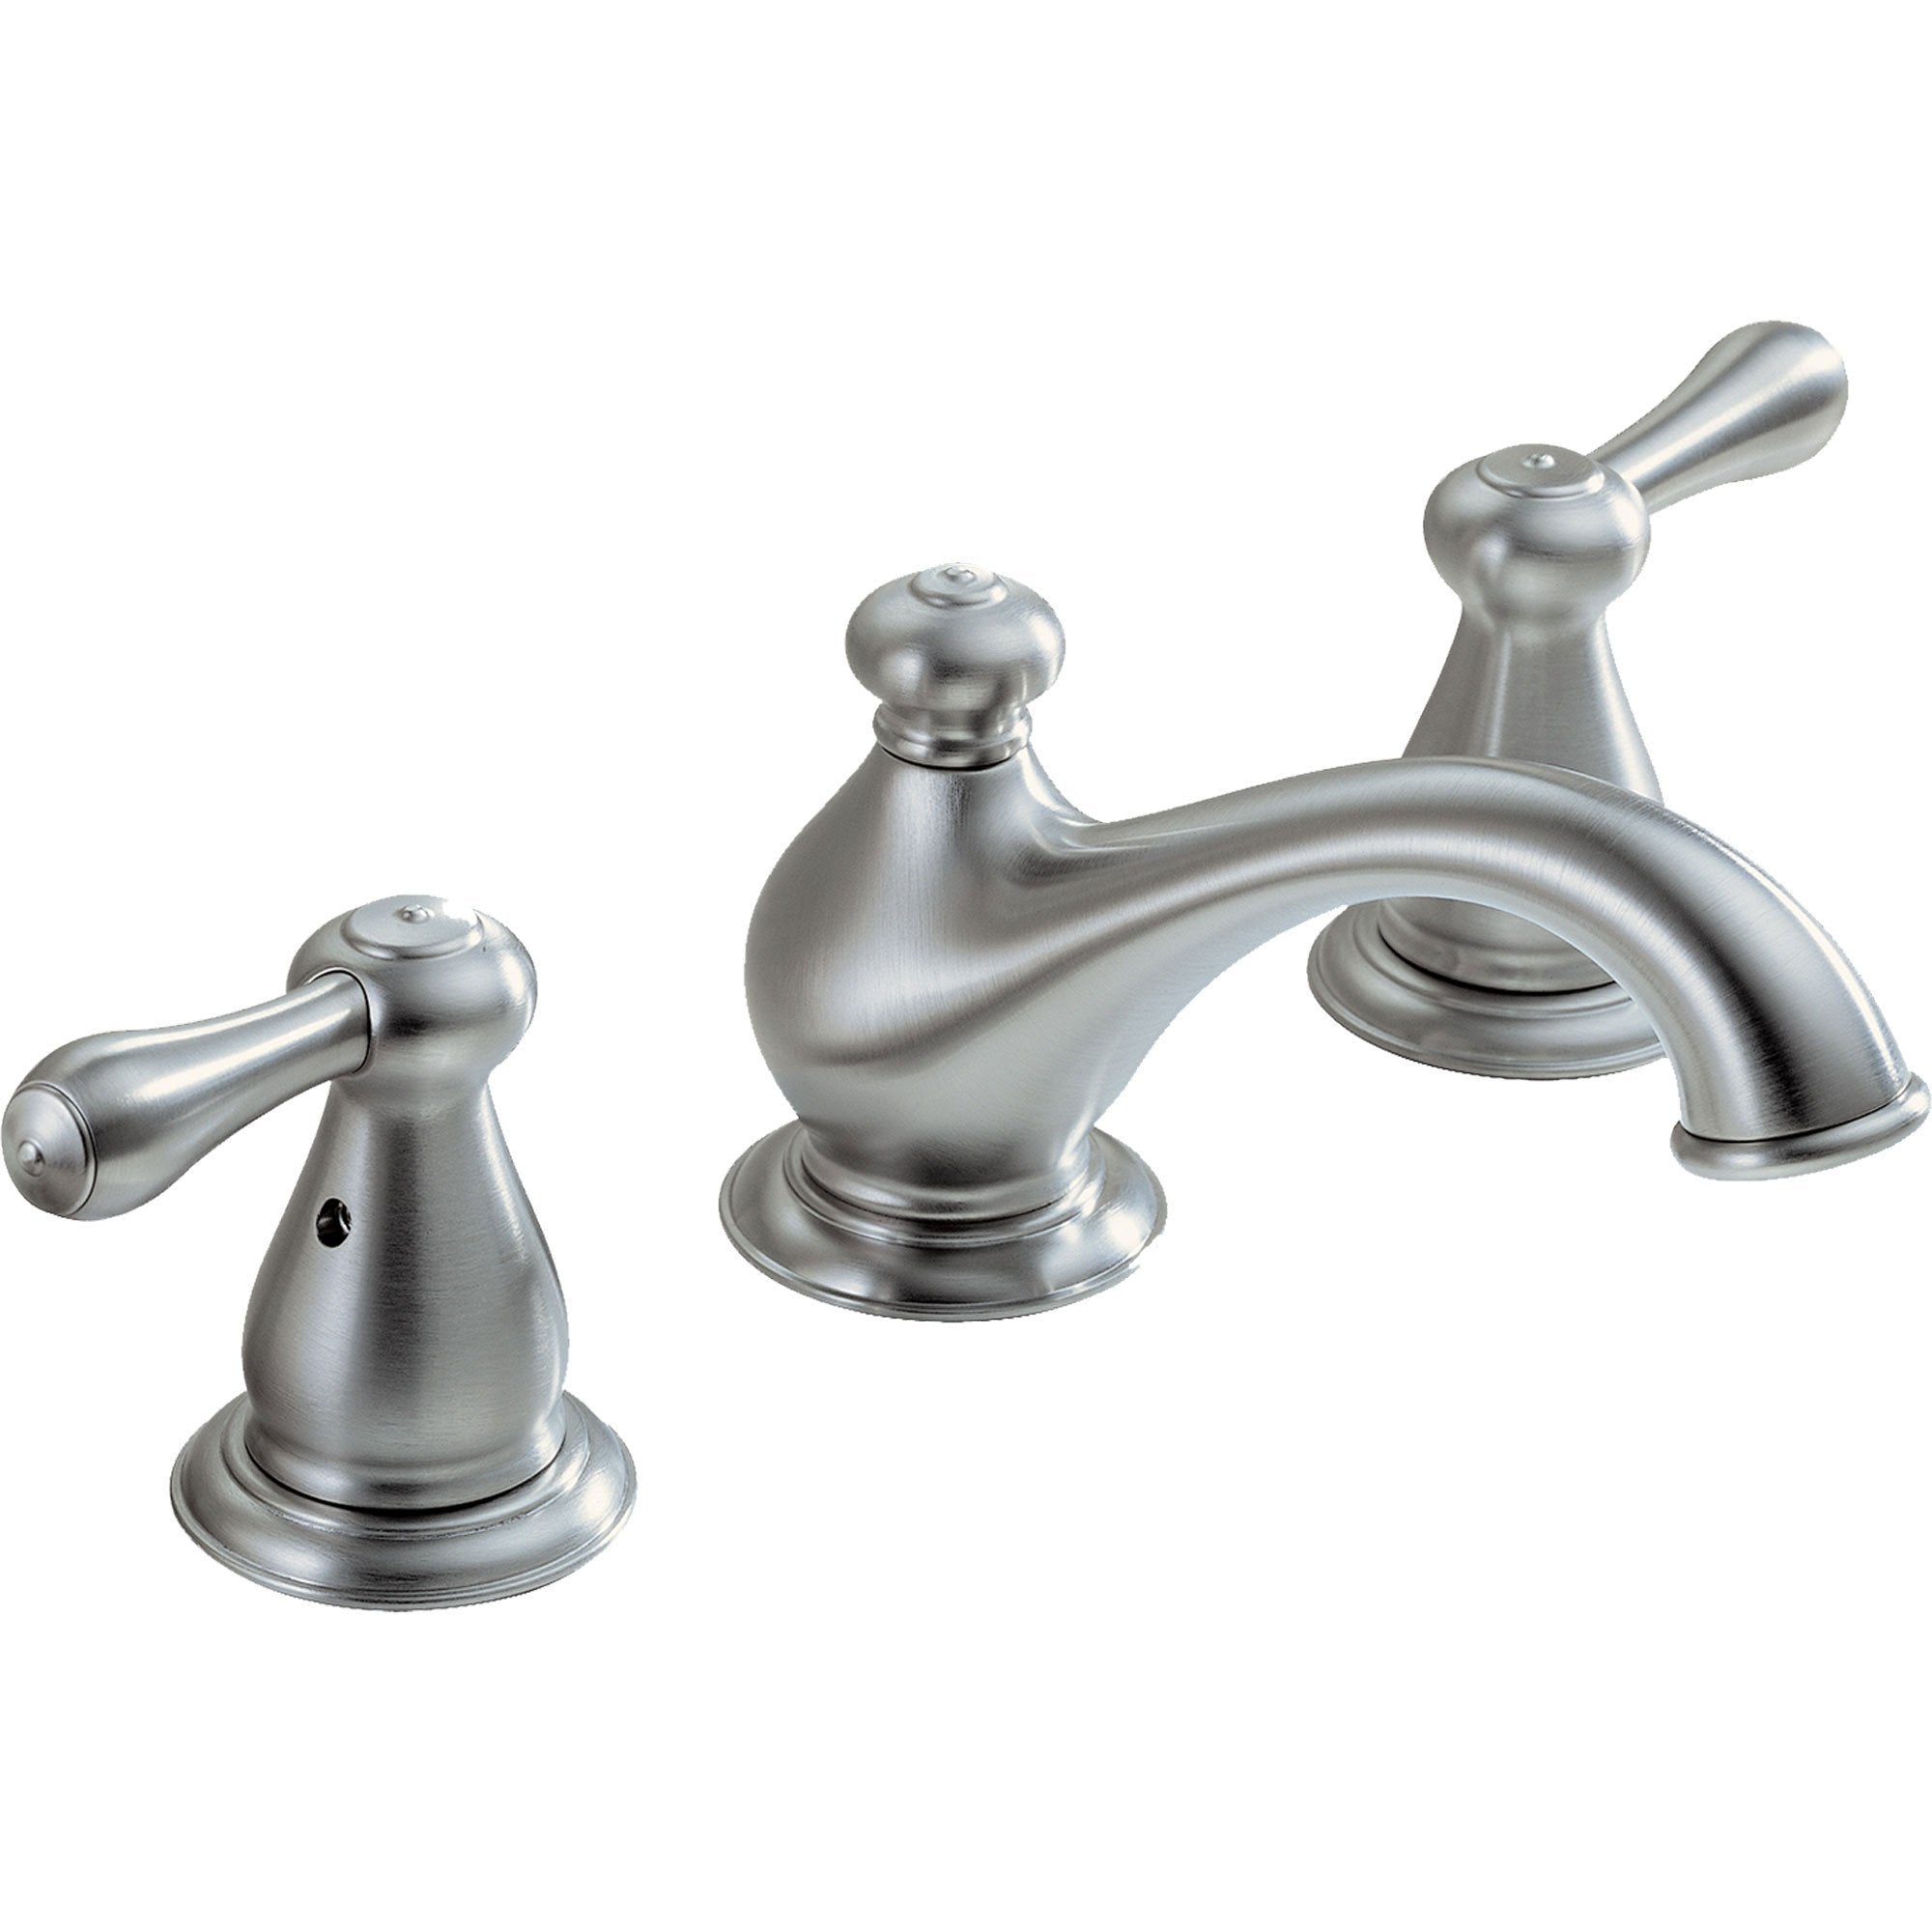 Delta Leland Mid Arc Stainless Finish Widespread Bathroom Sink Faucet 474231